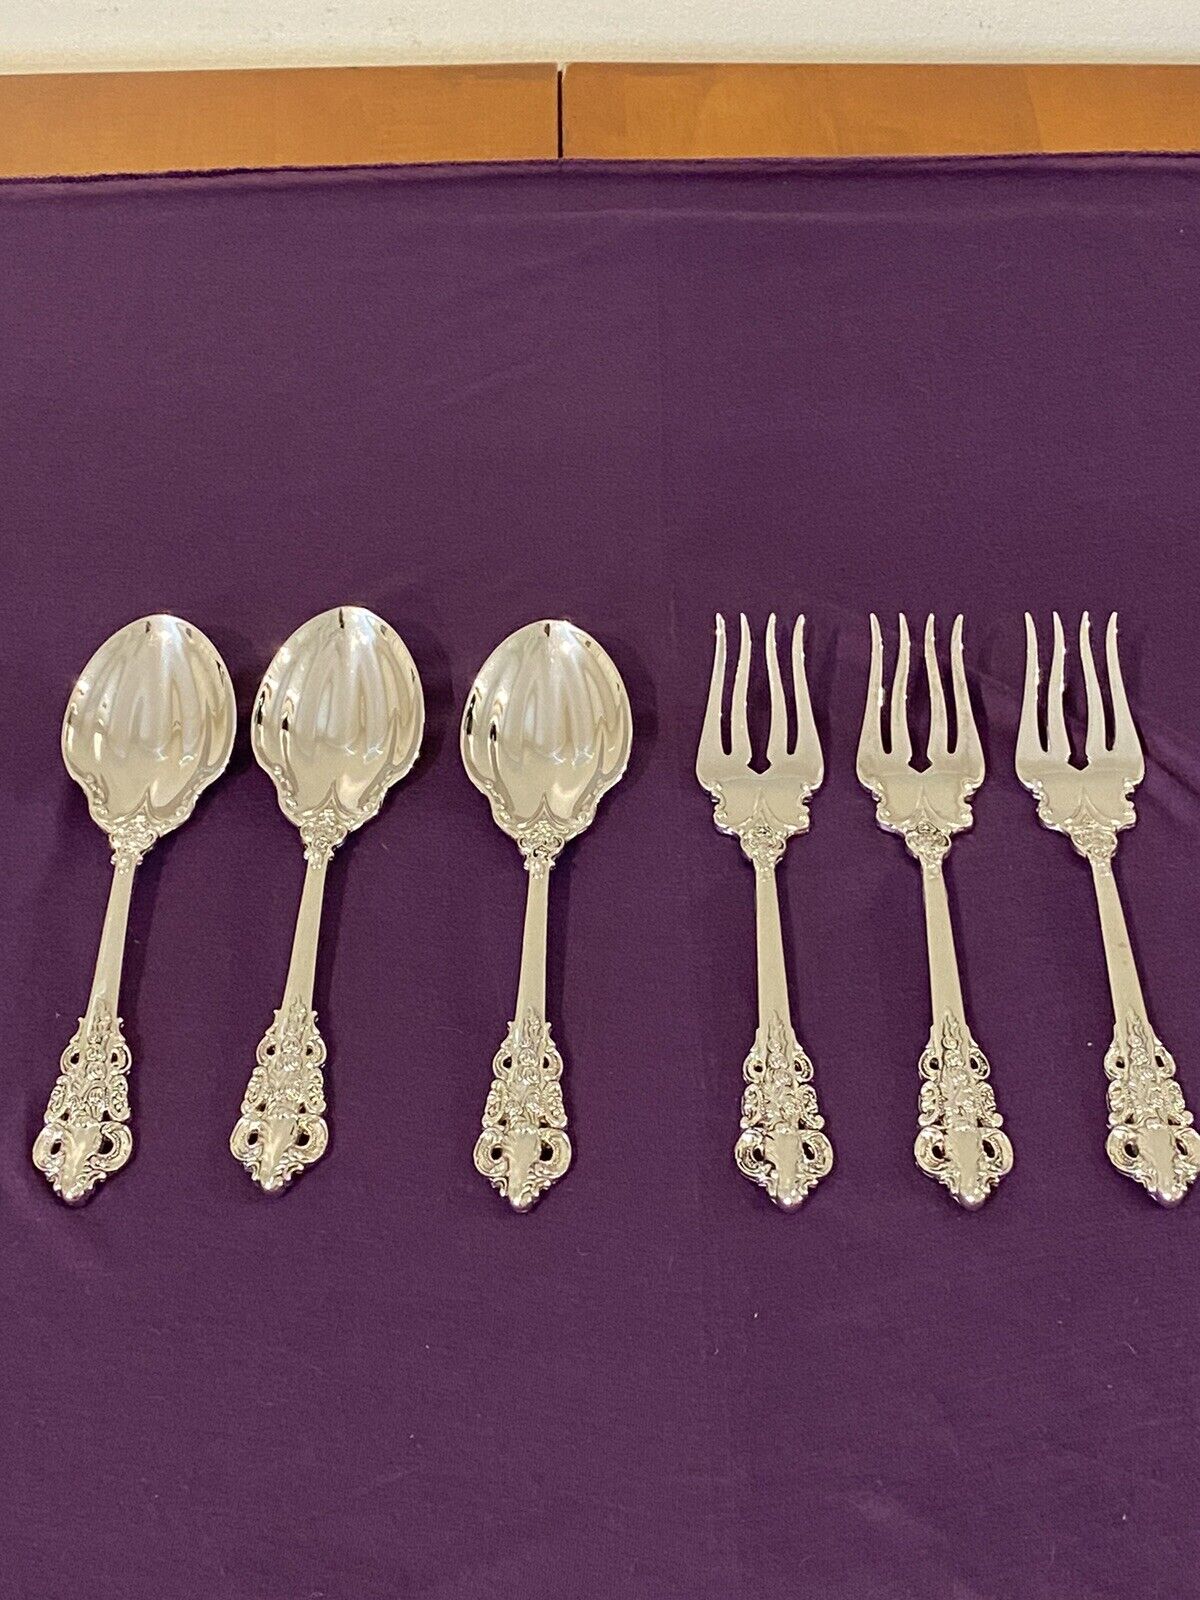 3 Serving Forks & Spoons Floral Scroll Silverplate Glossy Unbranded 9 1/4”